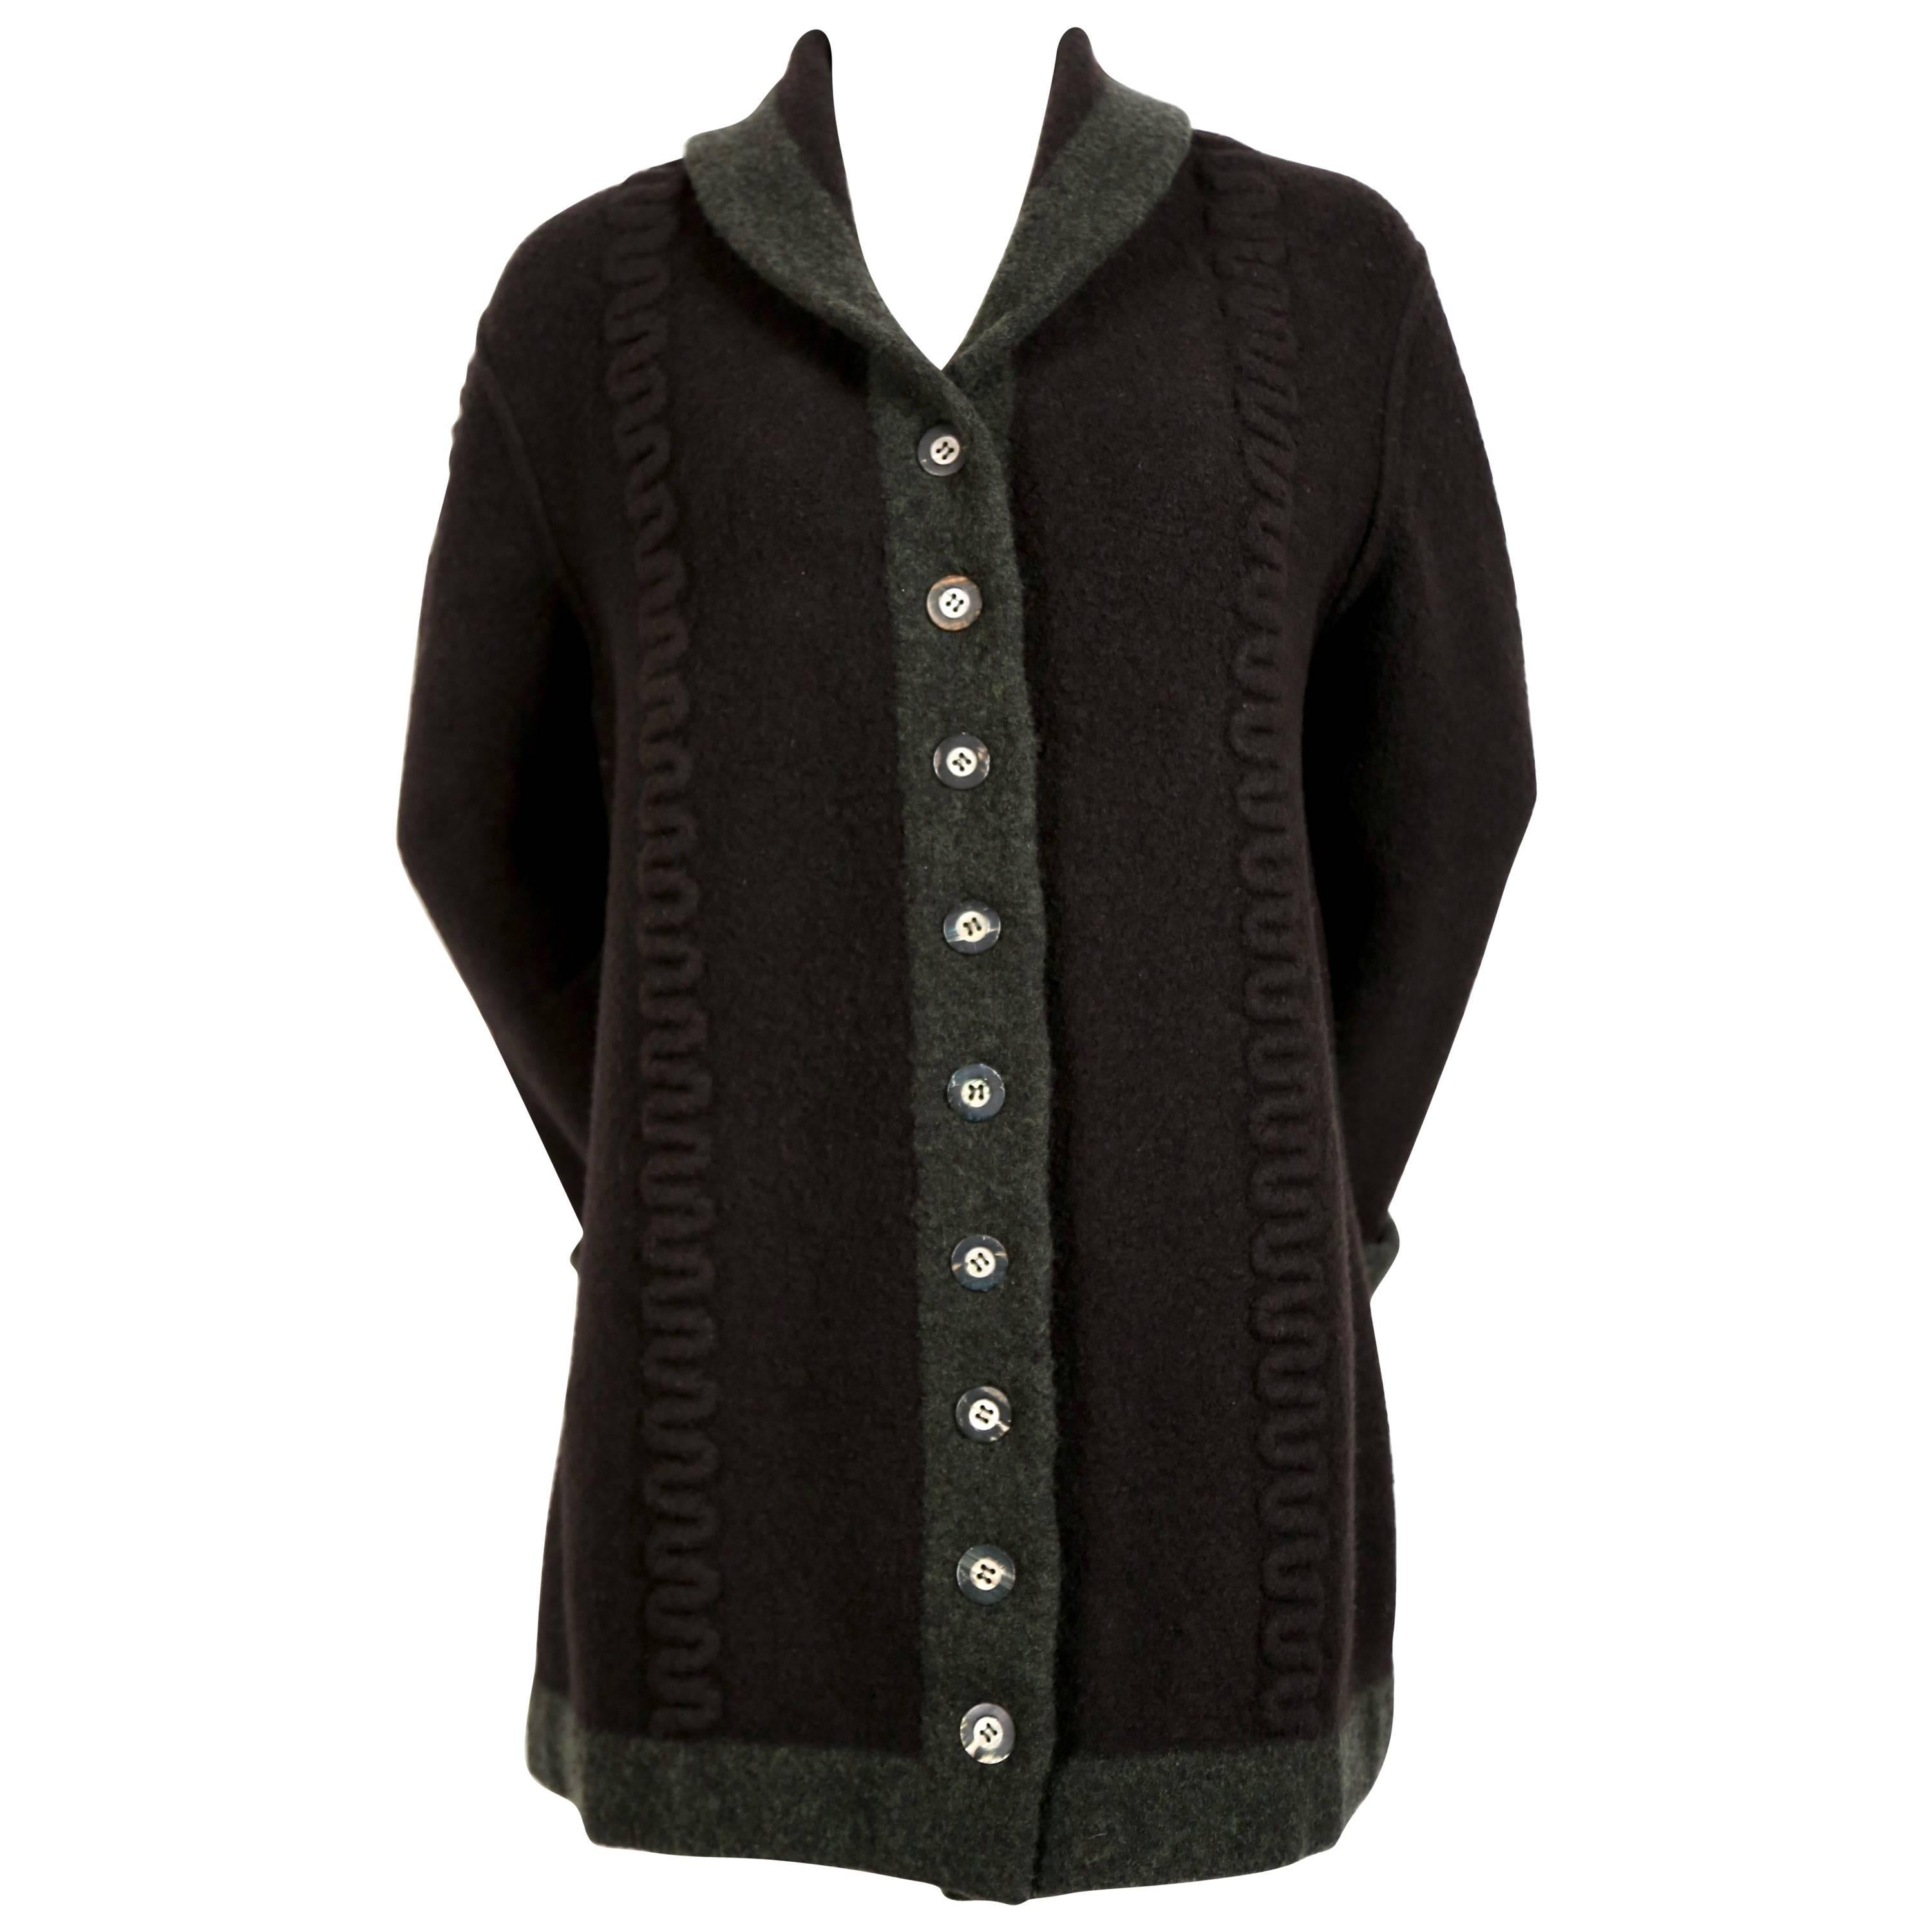 Azzedine Alaia navy blue and green wool cardigan sweater, 1994